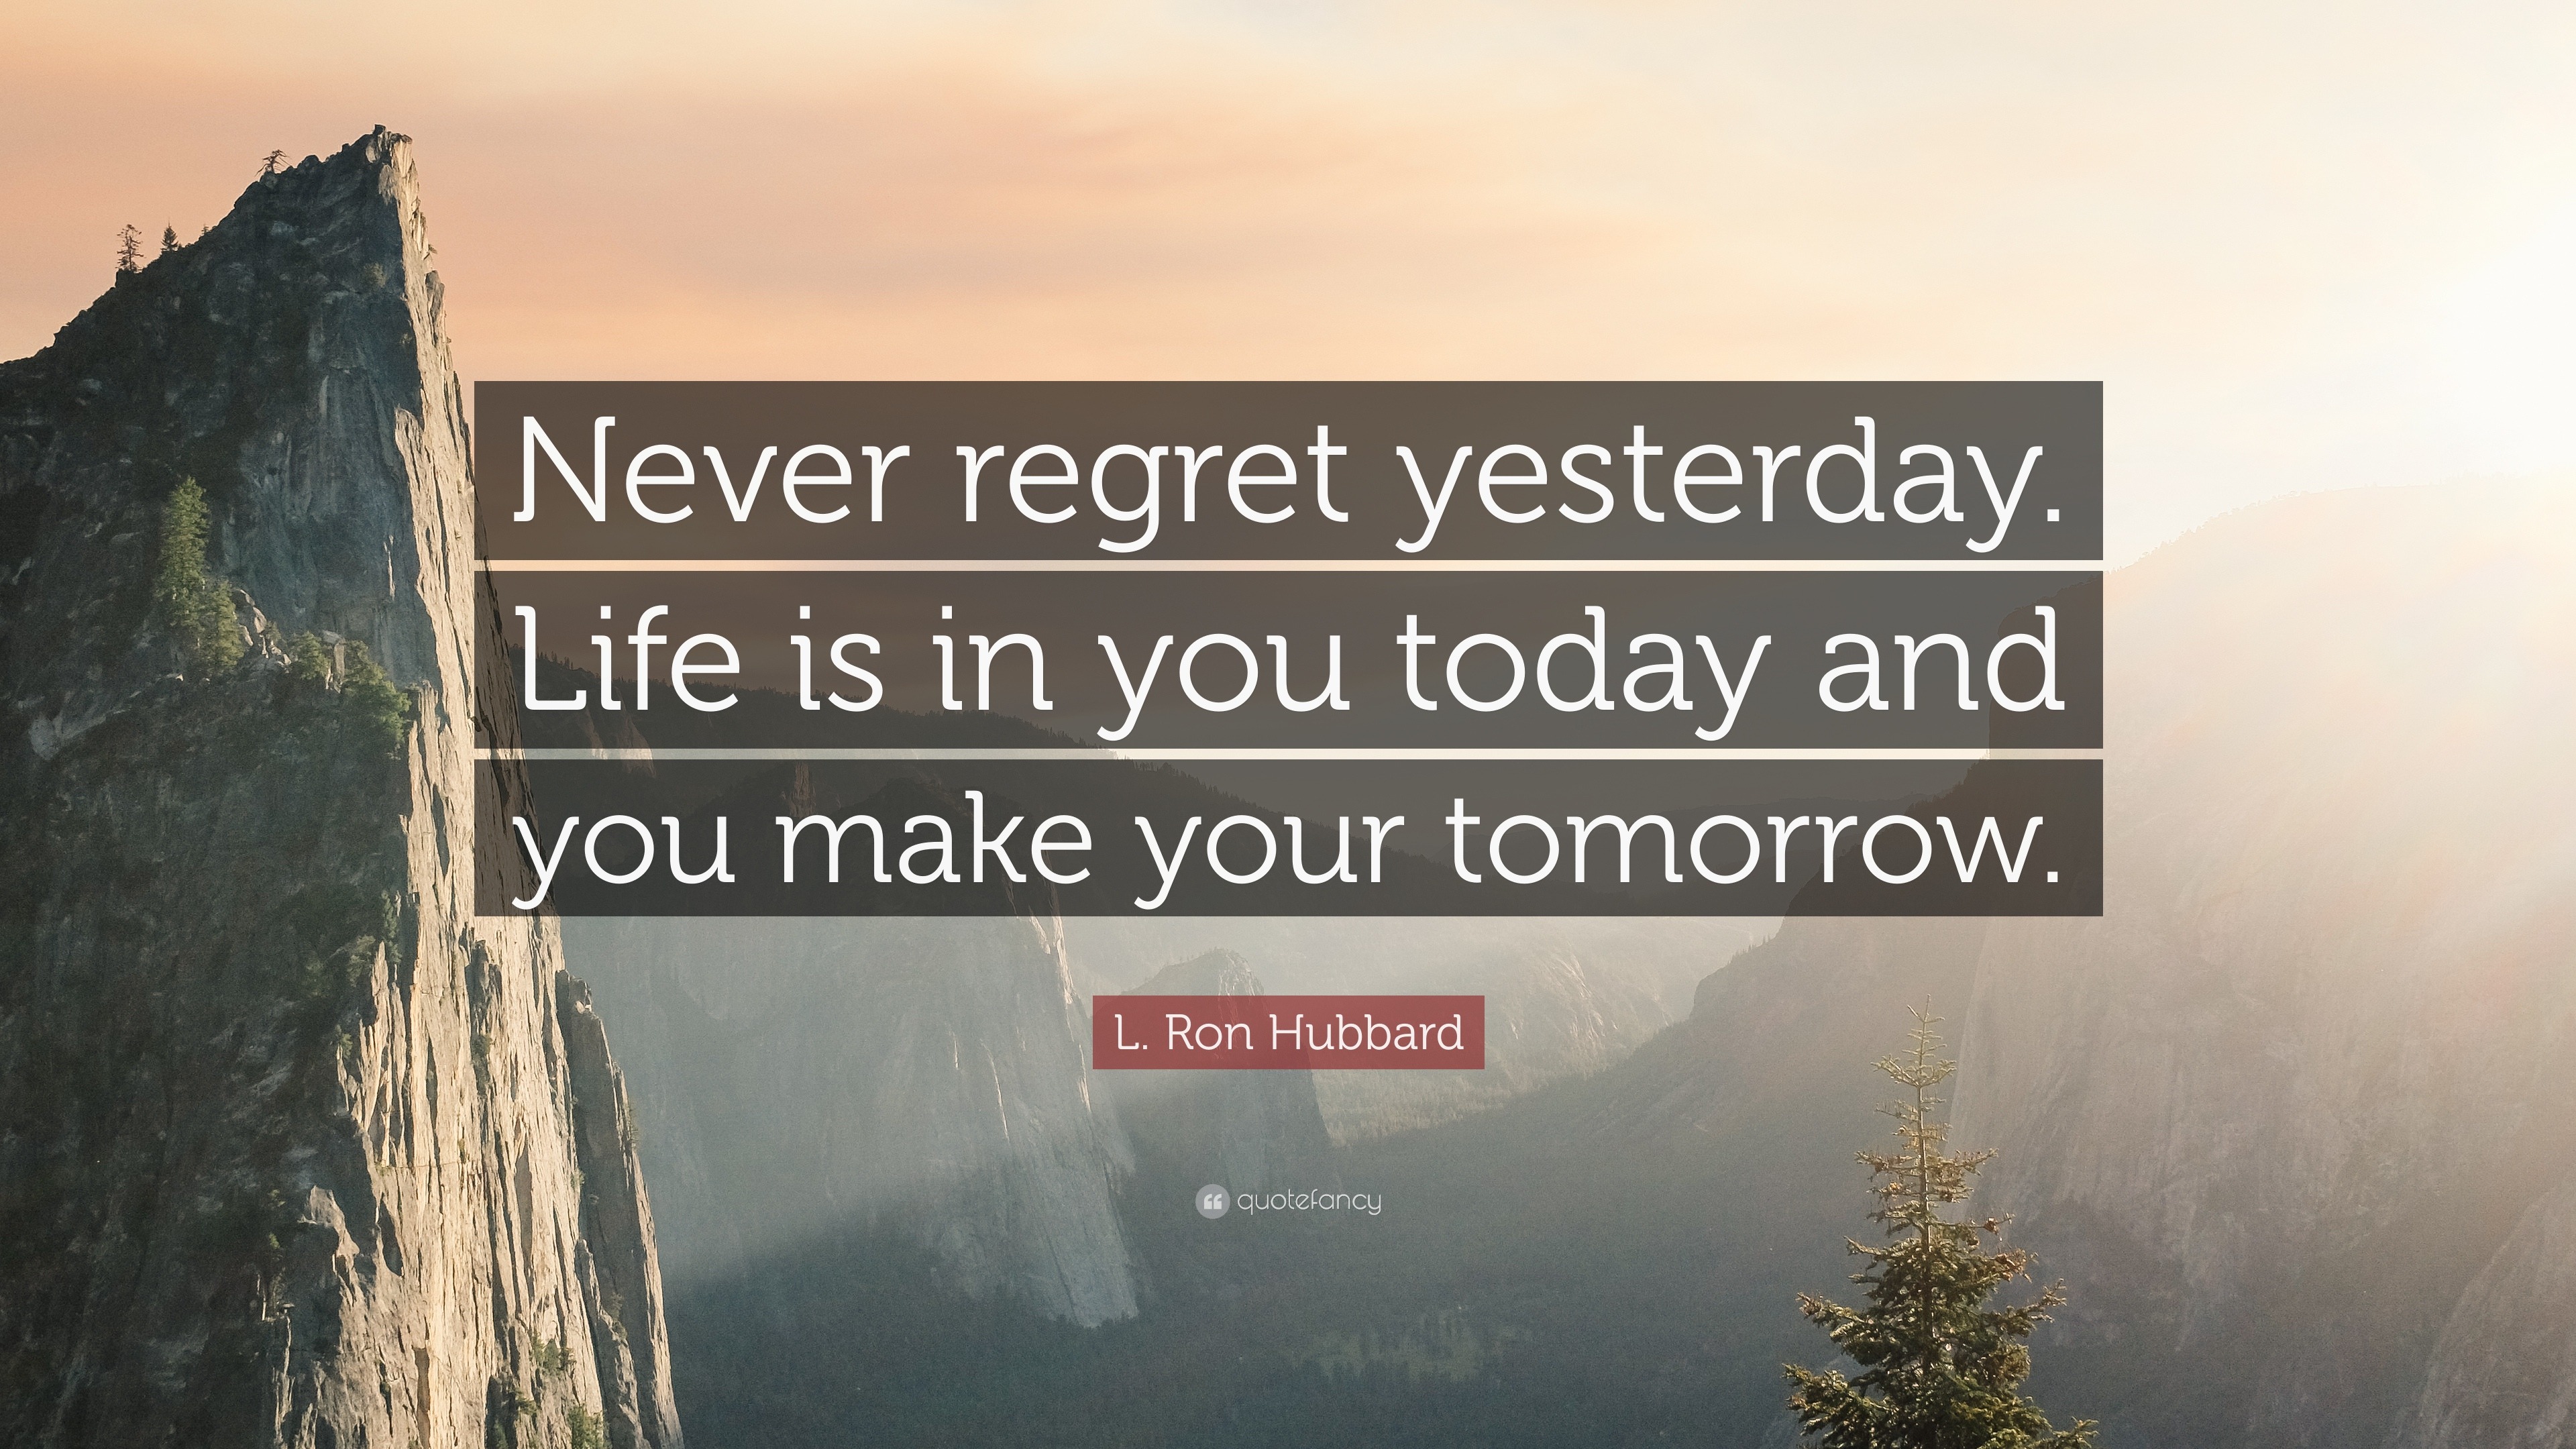 L. Ron Hubbard Quote: “Never regret yesterday. Life is in you today and ...